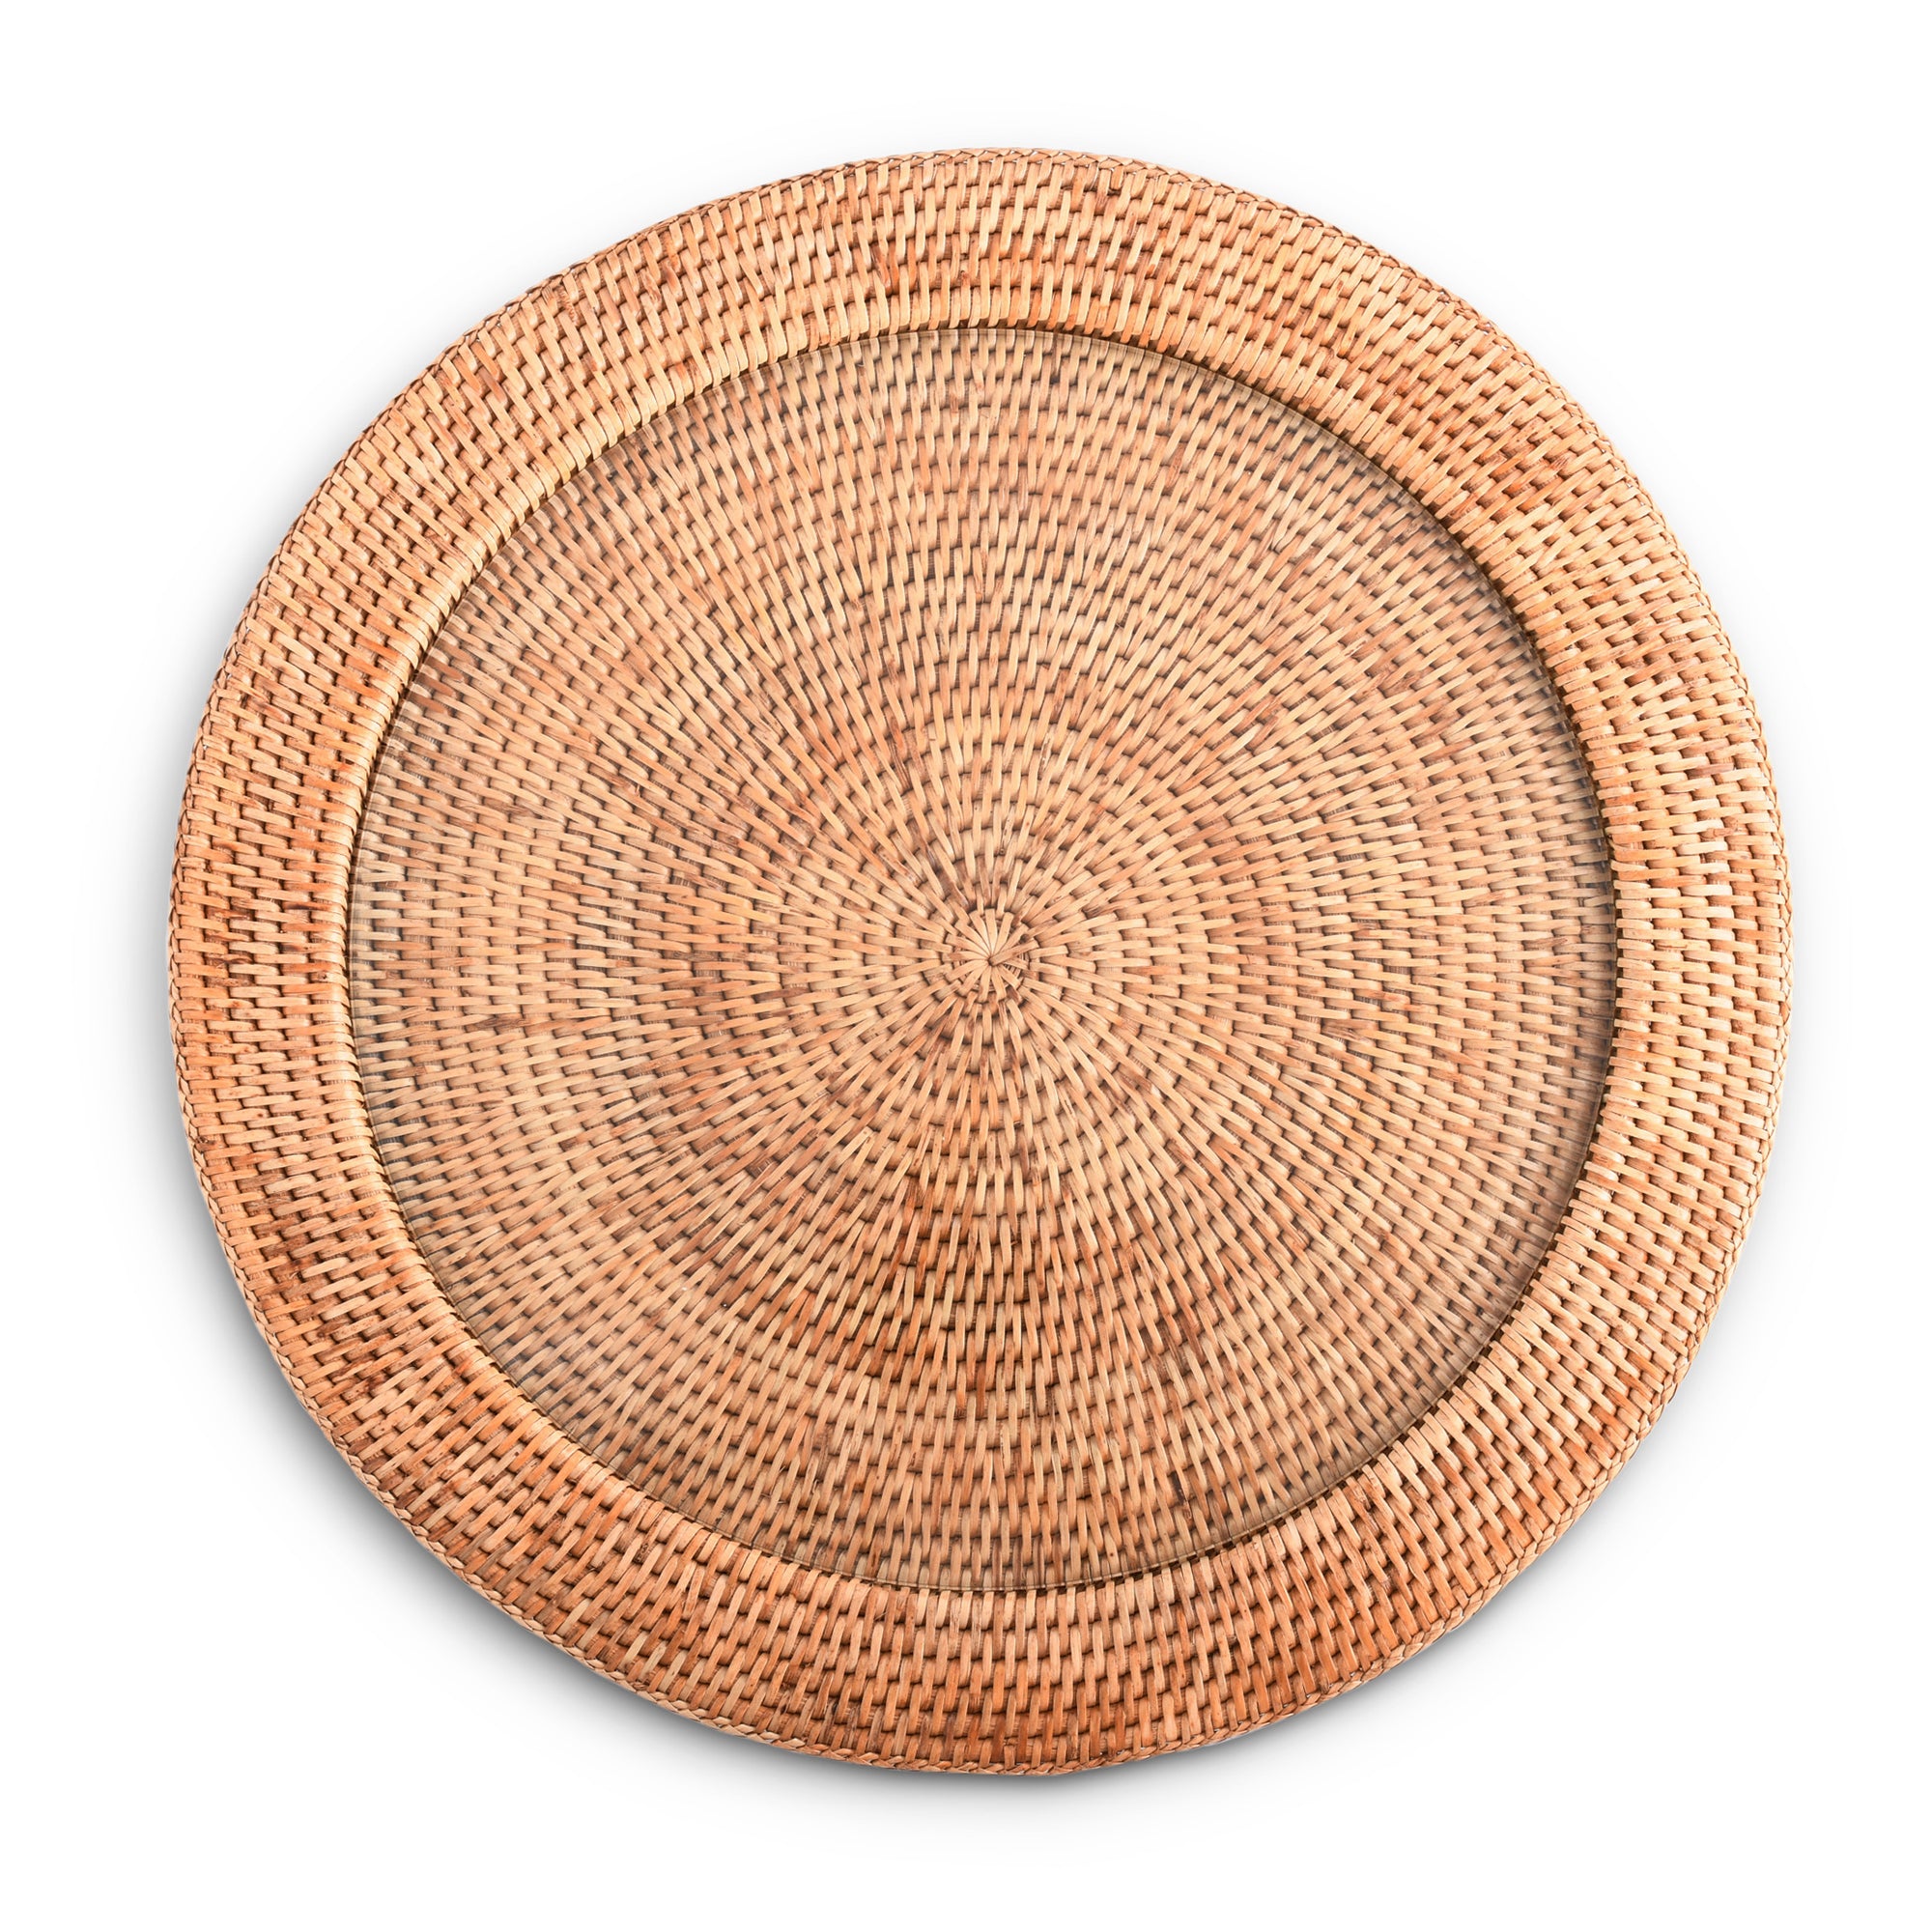 Vagabond House Round Serving Tray Hand Woven Wicker Rattan - Glass Insert Product Image